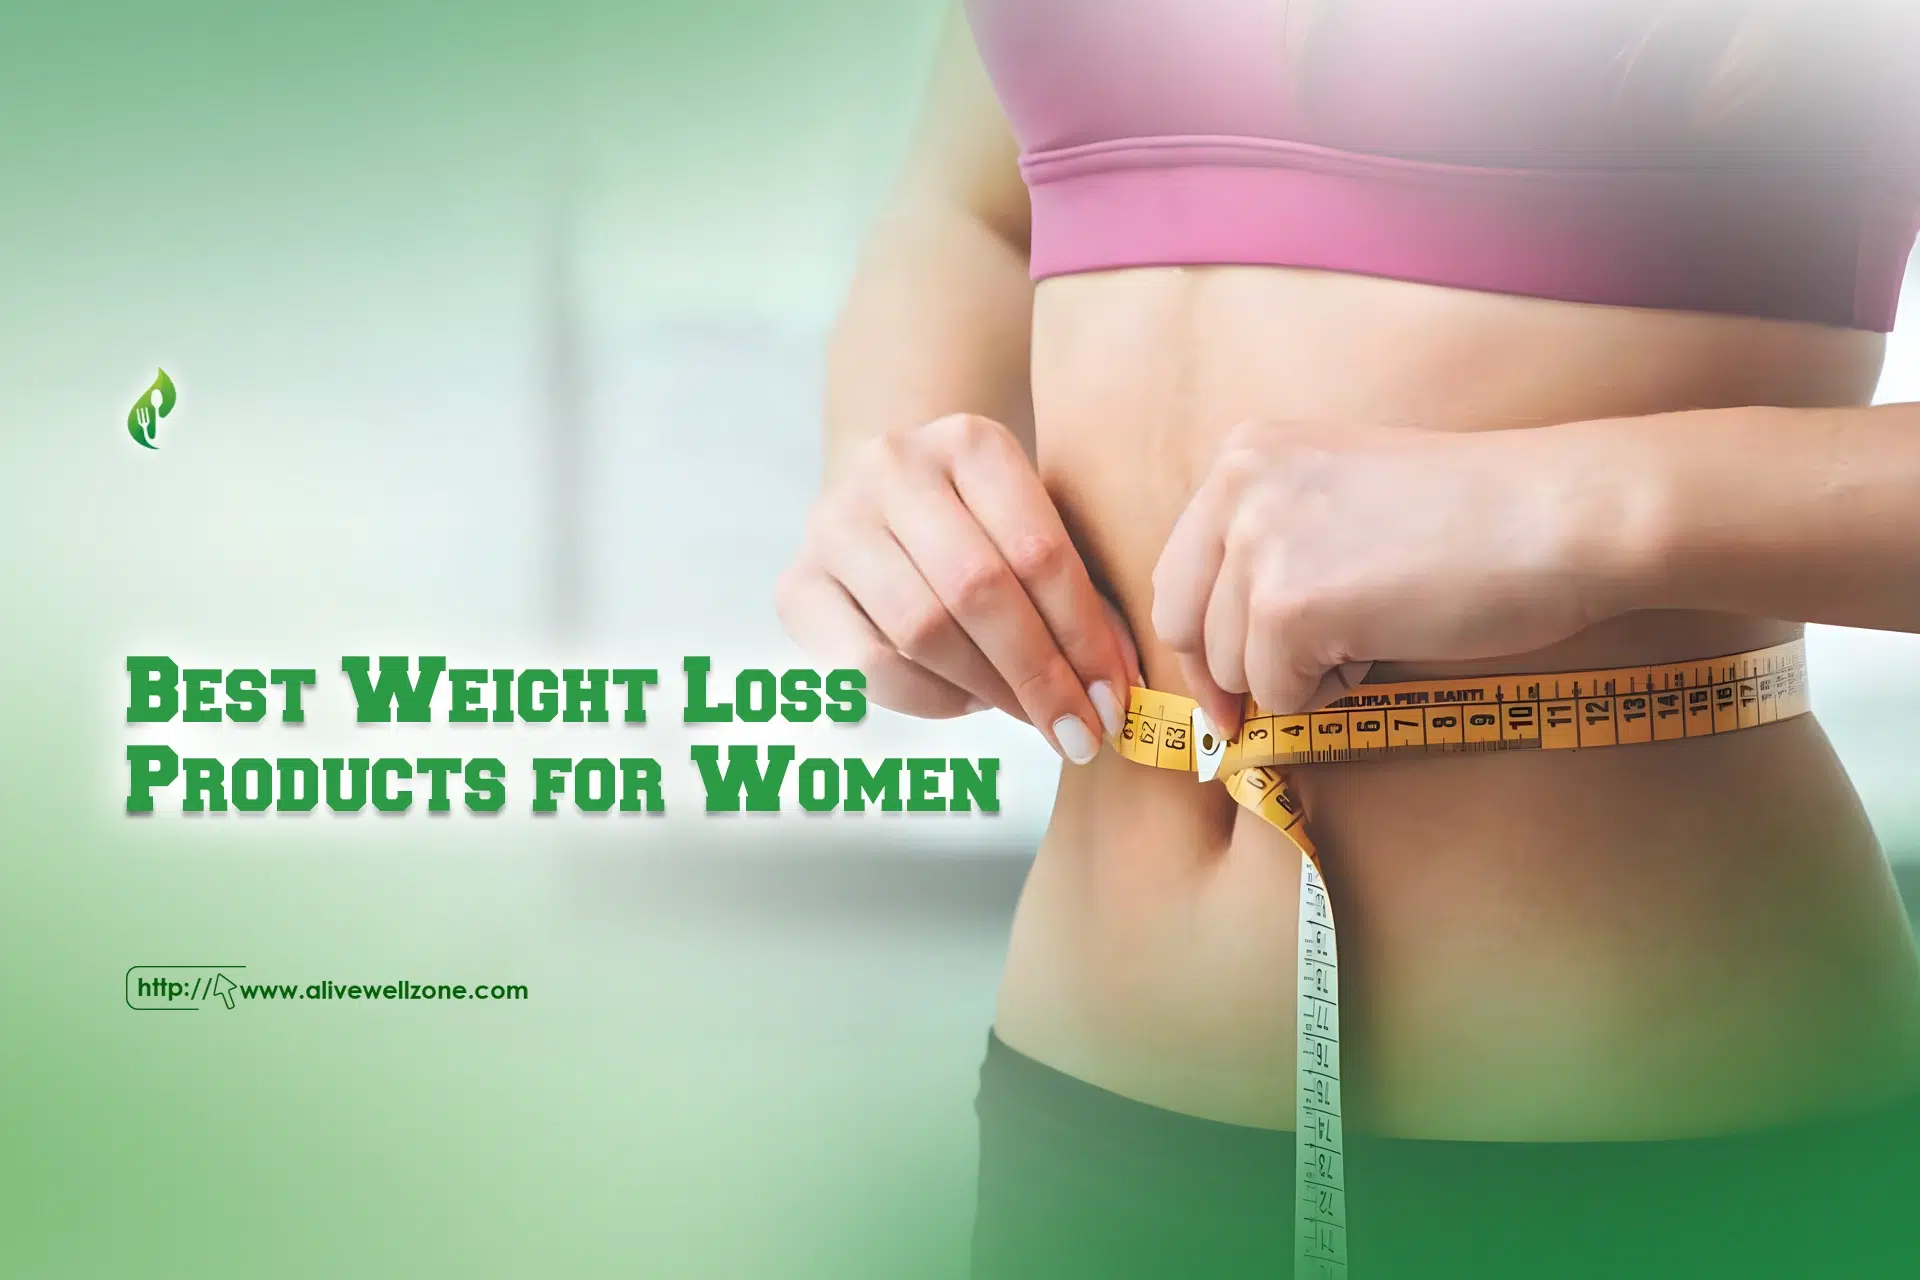 Best Weight Loss Products for Women